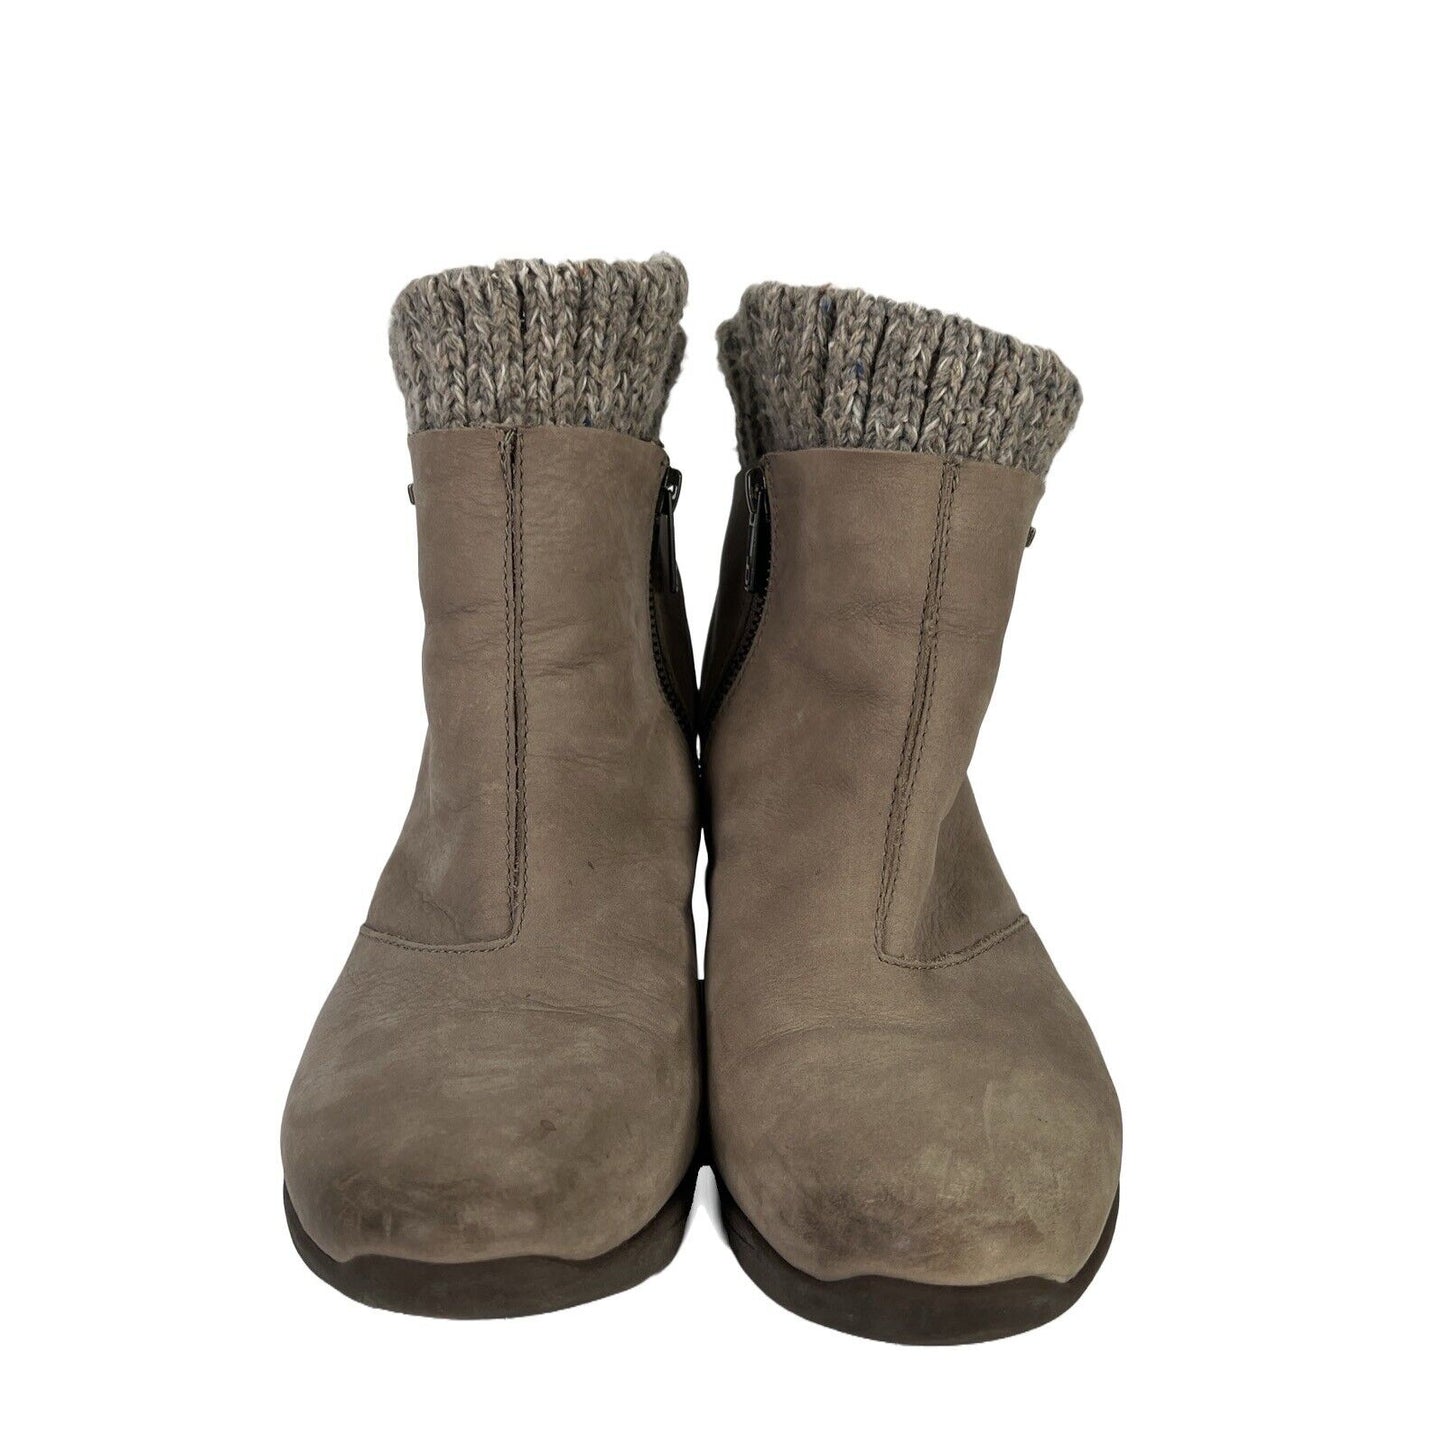 Bionica Women's Beige Suede Knit Lined Ankle Boots - 9